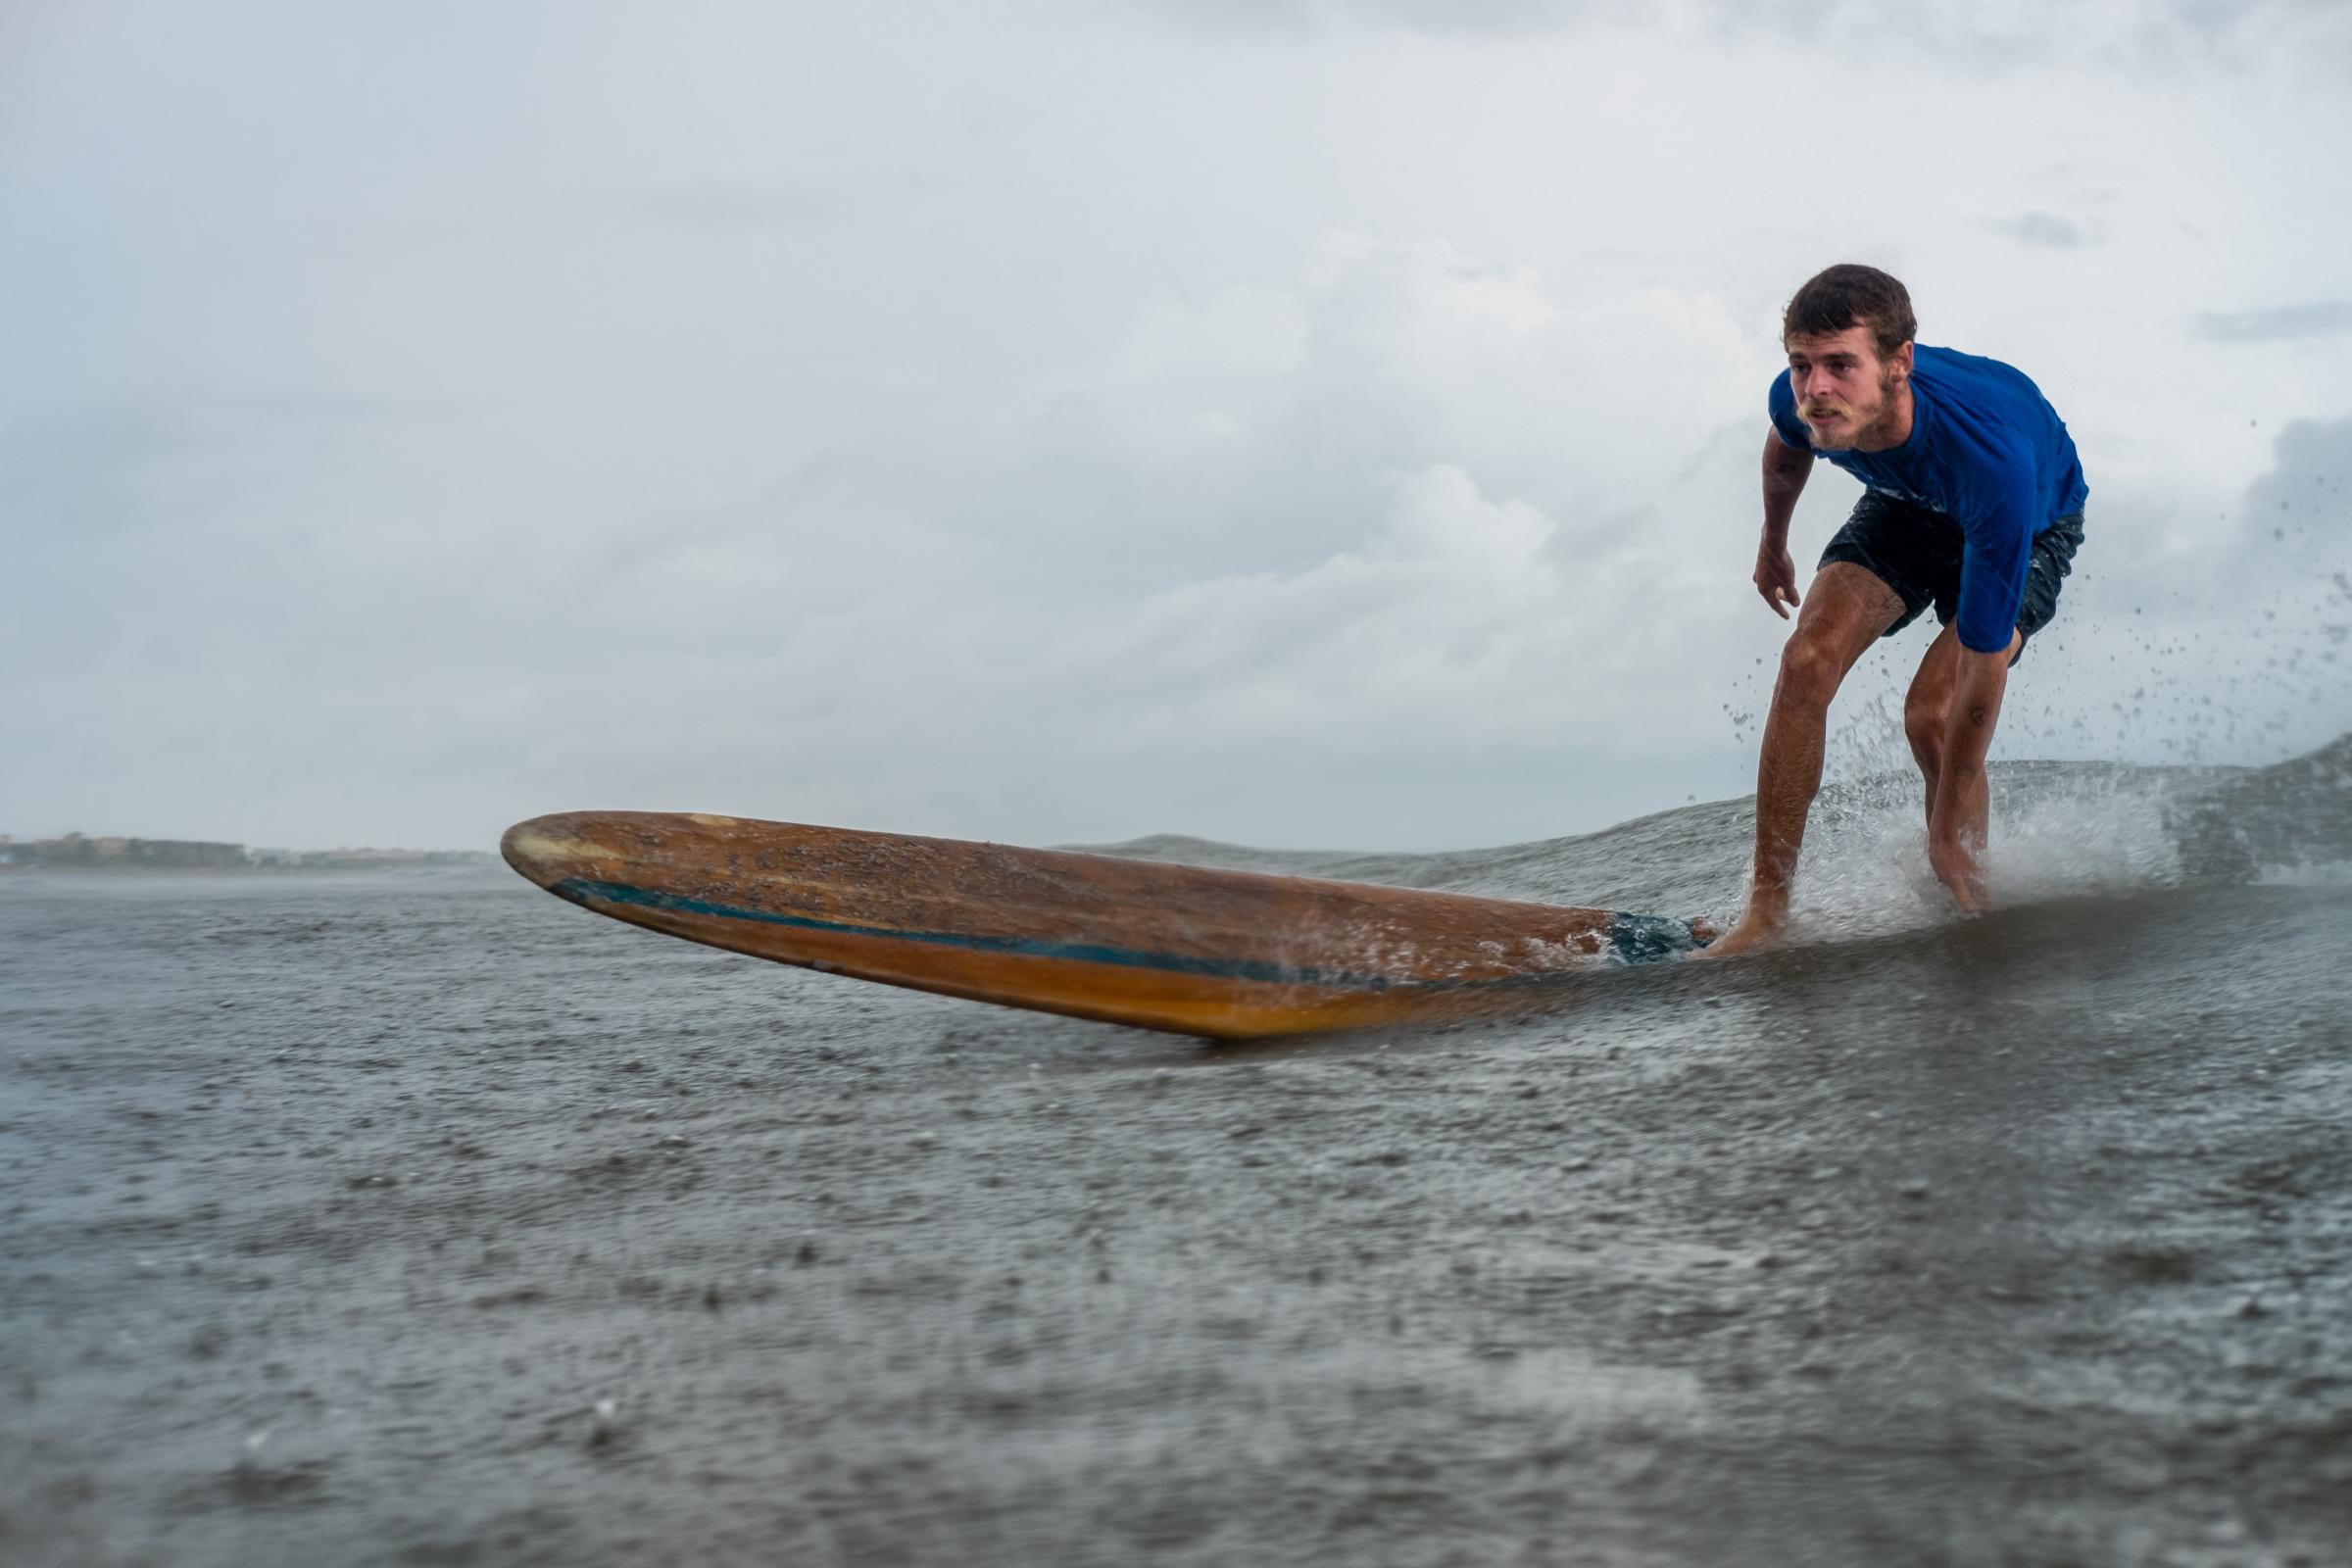 Cape Canaveral, FL. Hotdogzonastix Surf Contest July 2021 -  Patrick Conklin bottom turning on a 1960s longboard at...